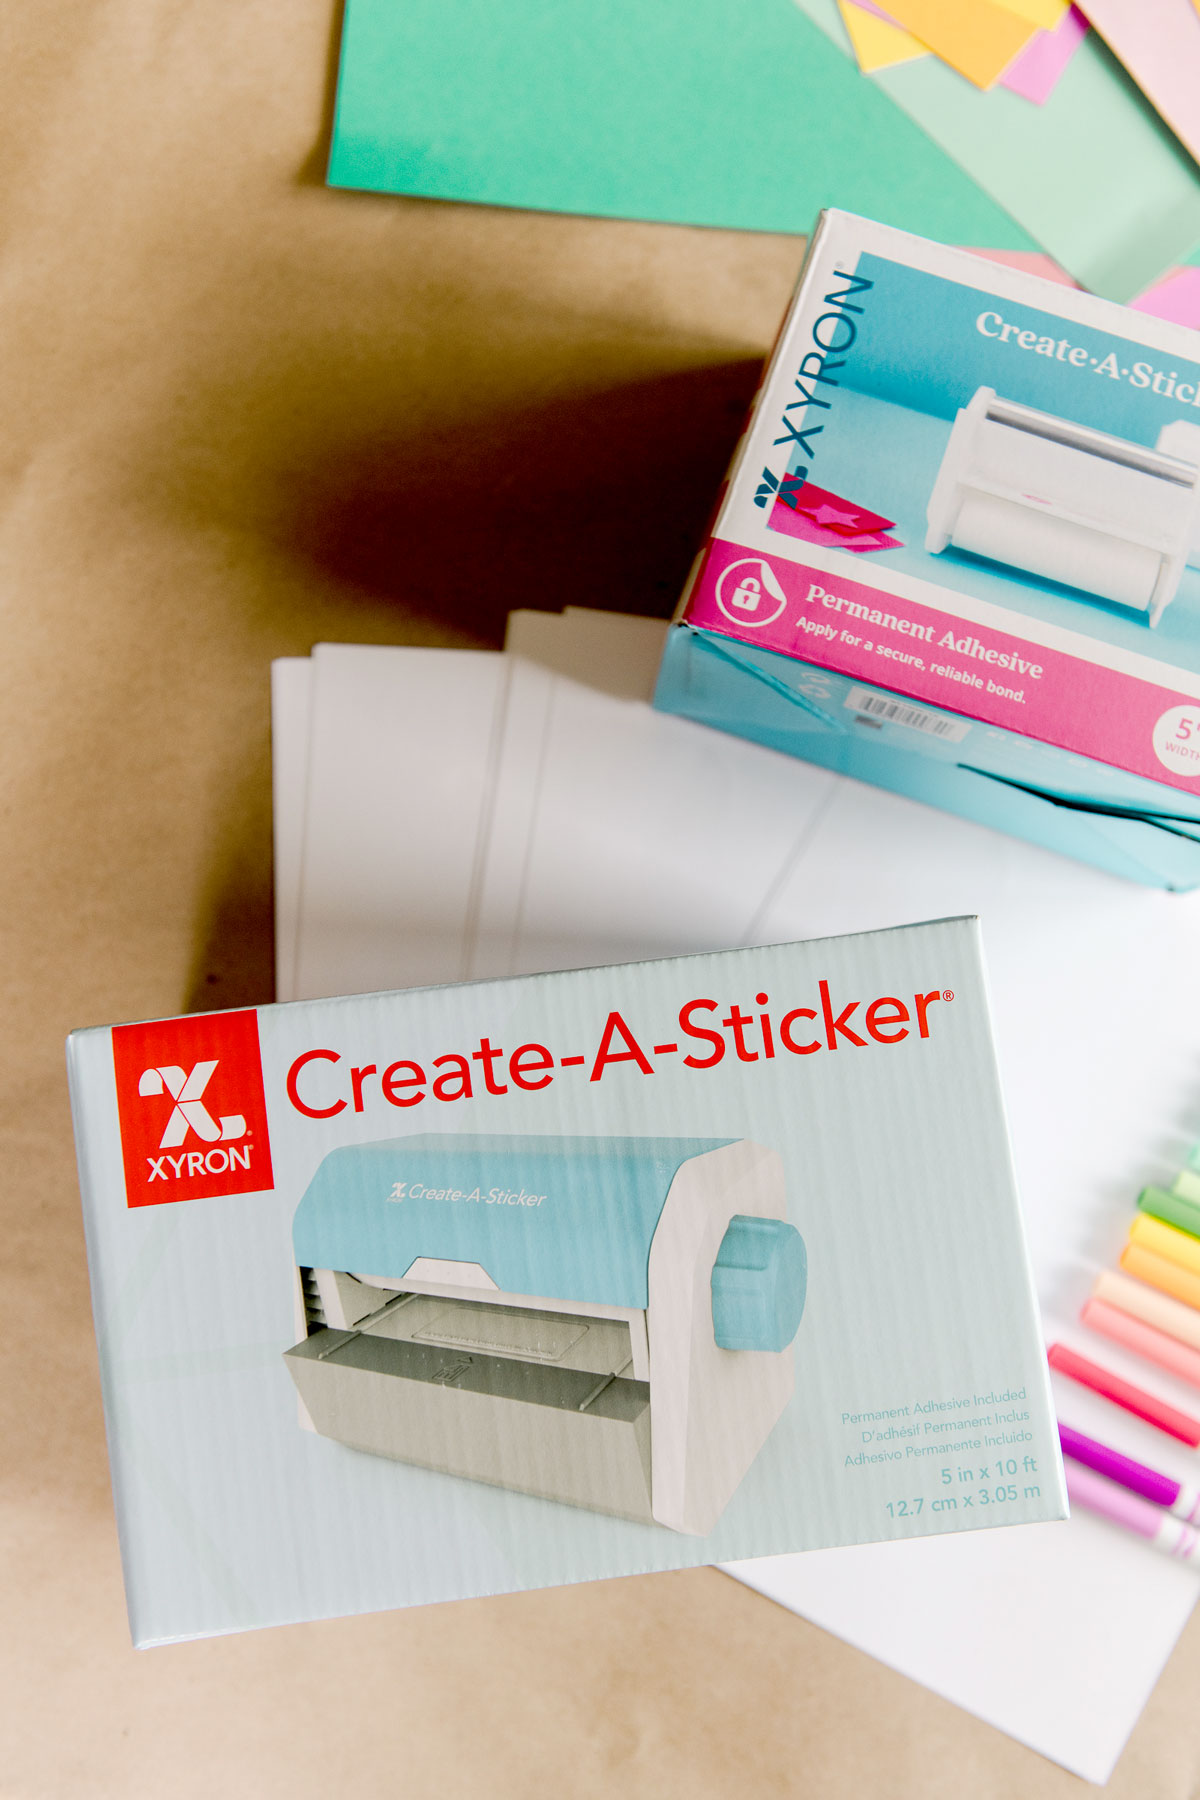 Xyron® Create-A-Sticker® Sticker Maker
Some paper - any color honestly in a variety of thickness
Optional markers or colored pencils for adding color :) 
Your fave BBQ or kabob foods with skewers or sticks for labeling
